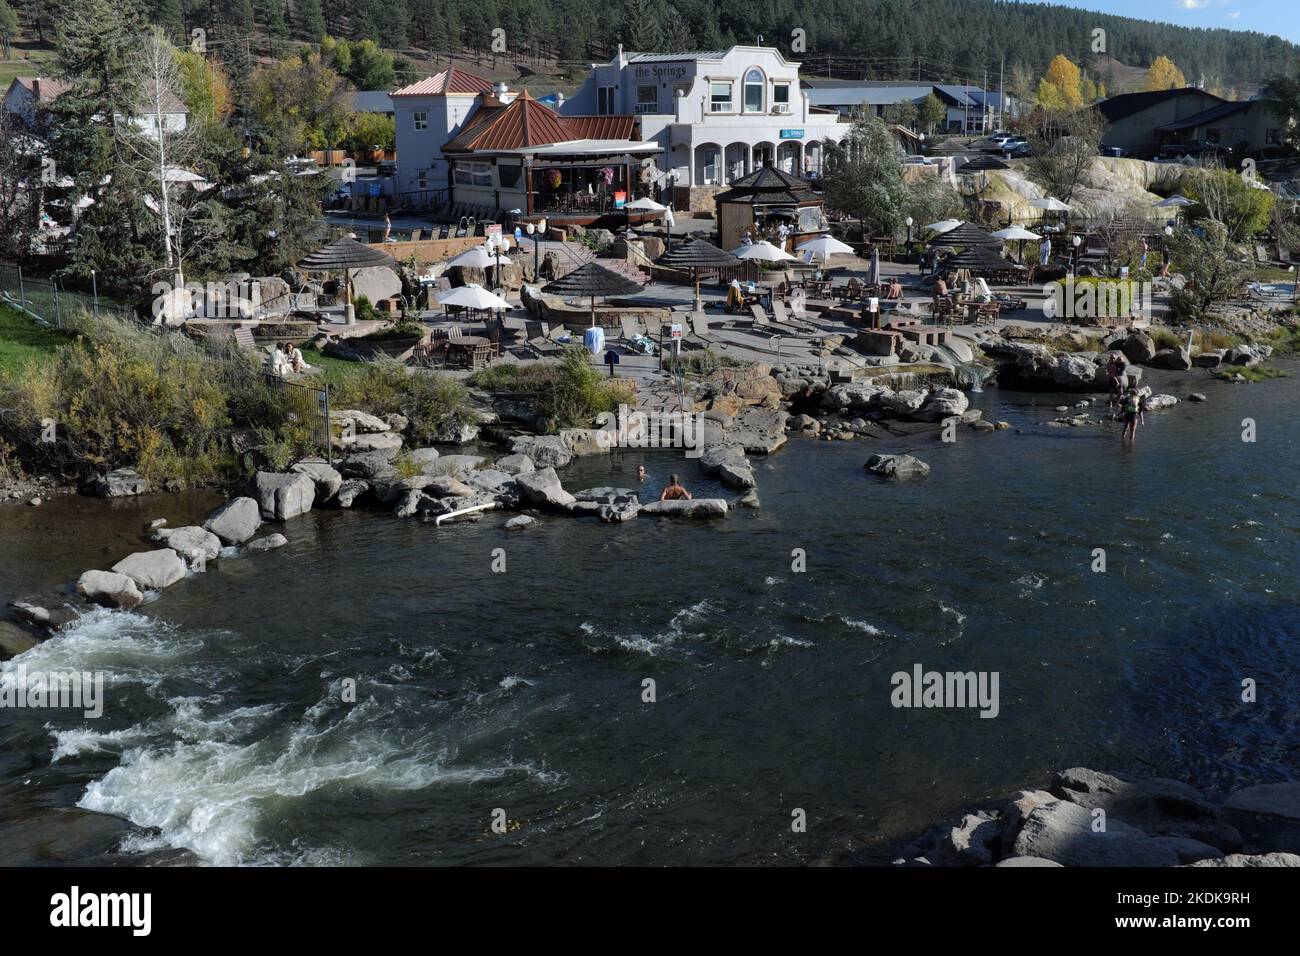 The Springs Resort and Spa known for their hot springs is alongside the San Juan River in Pagosa Springs, Colorado, USA. Stock Photo